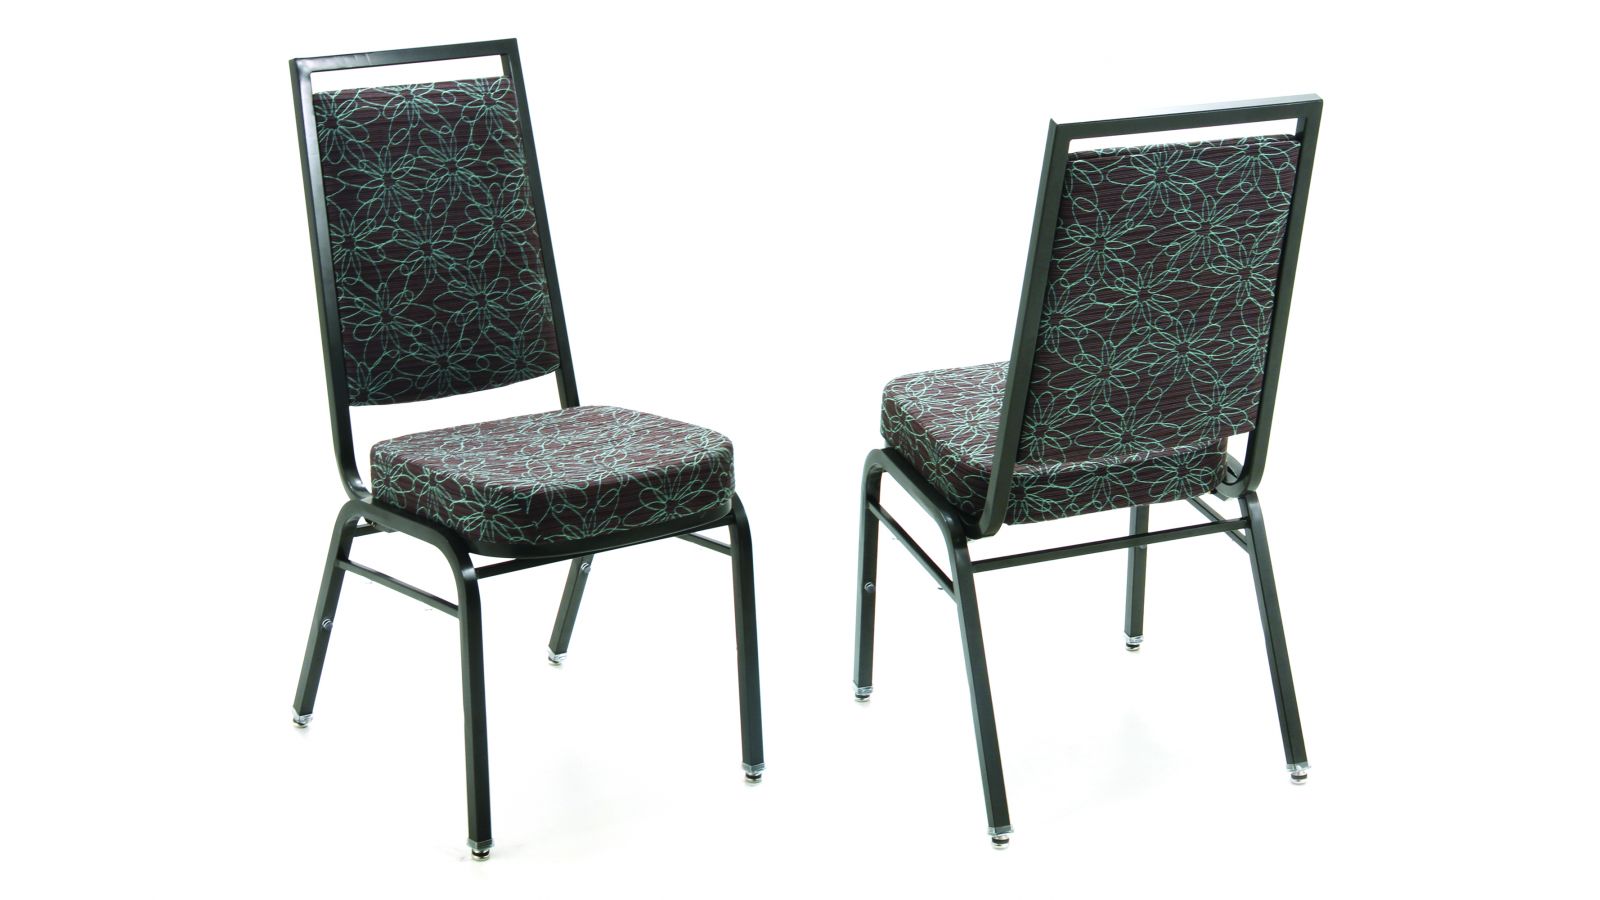 MityLite Classic Series Banquet Seating